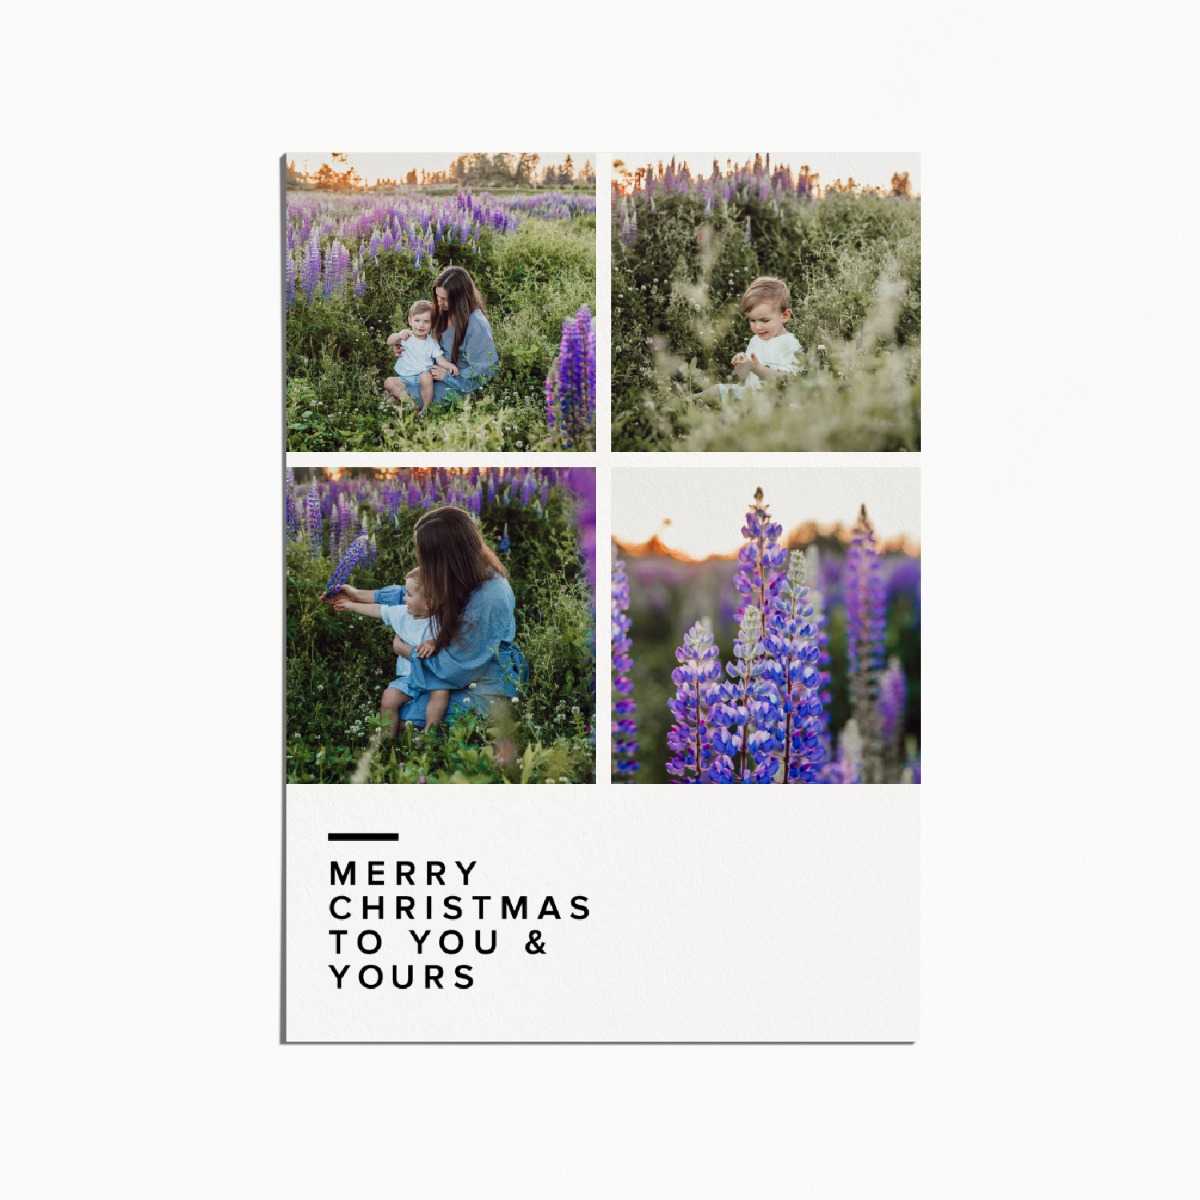 Holiday card with 4 images of a mother and child sitting in a field of lupin flowers